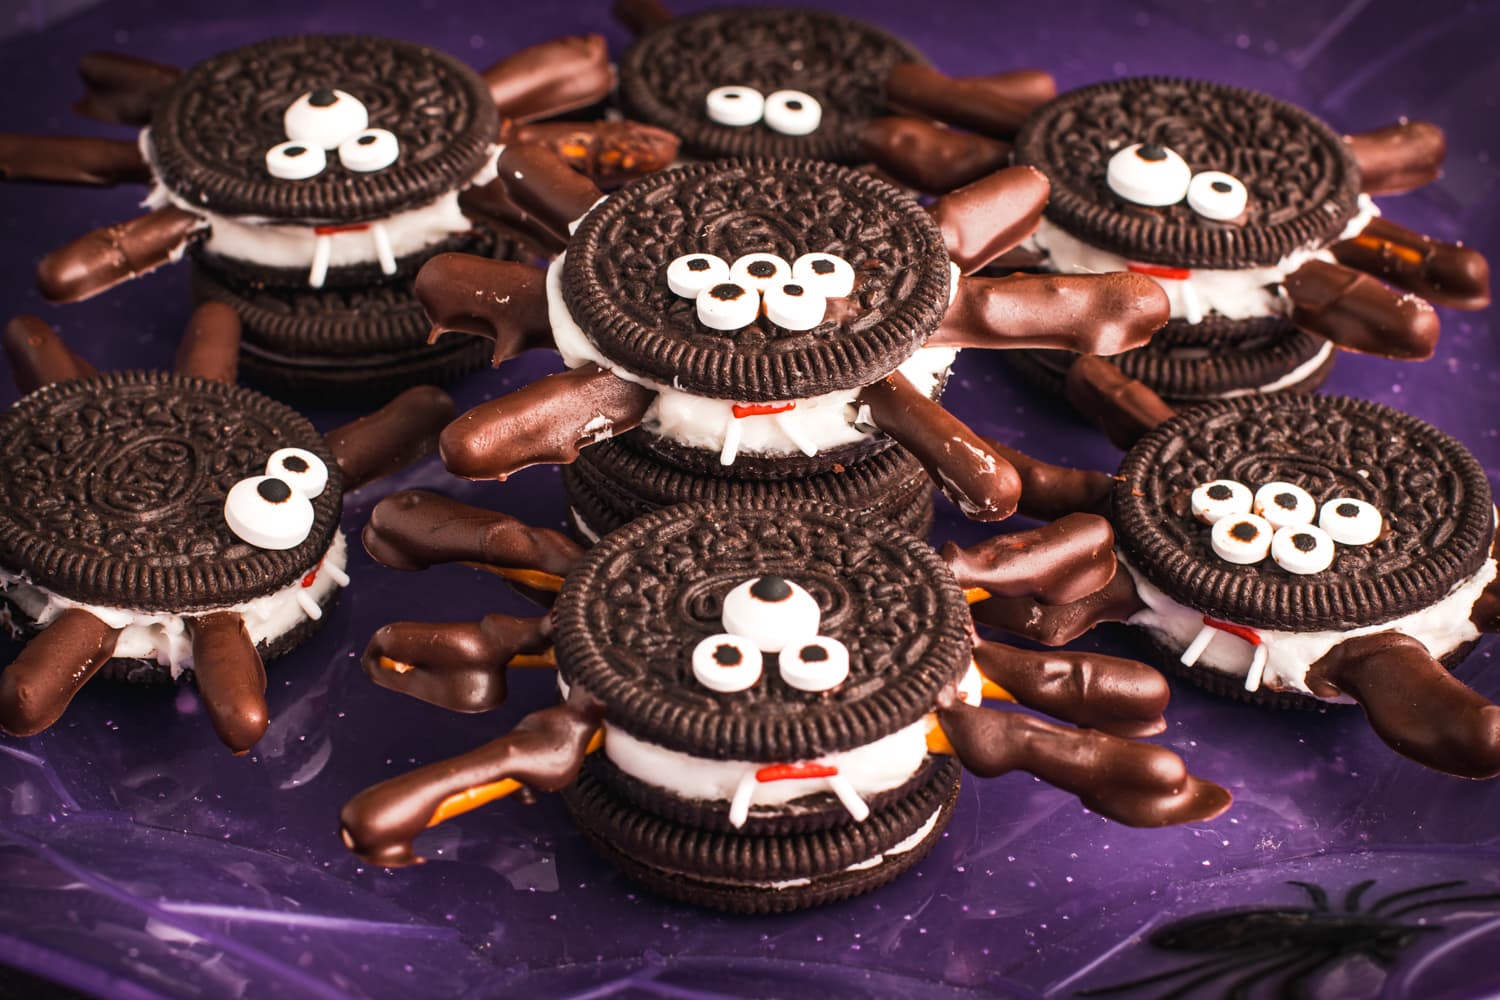 A purple plate with Spider Oreo Cookies